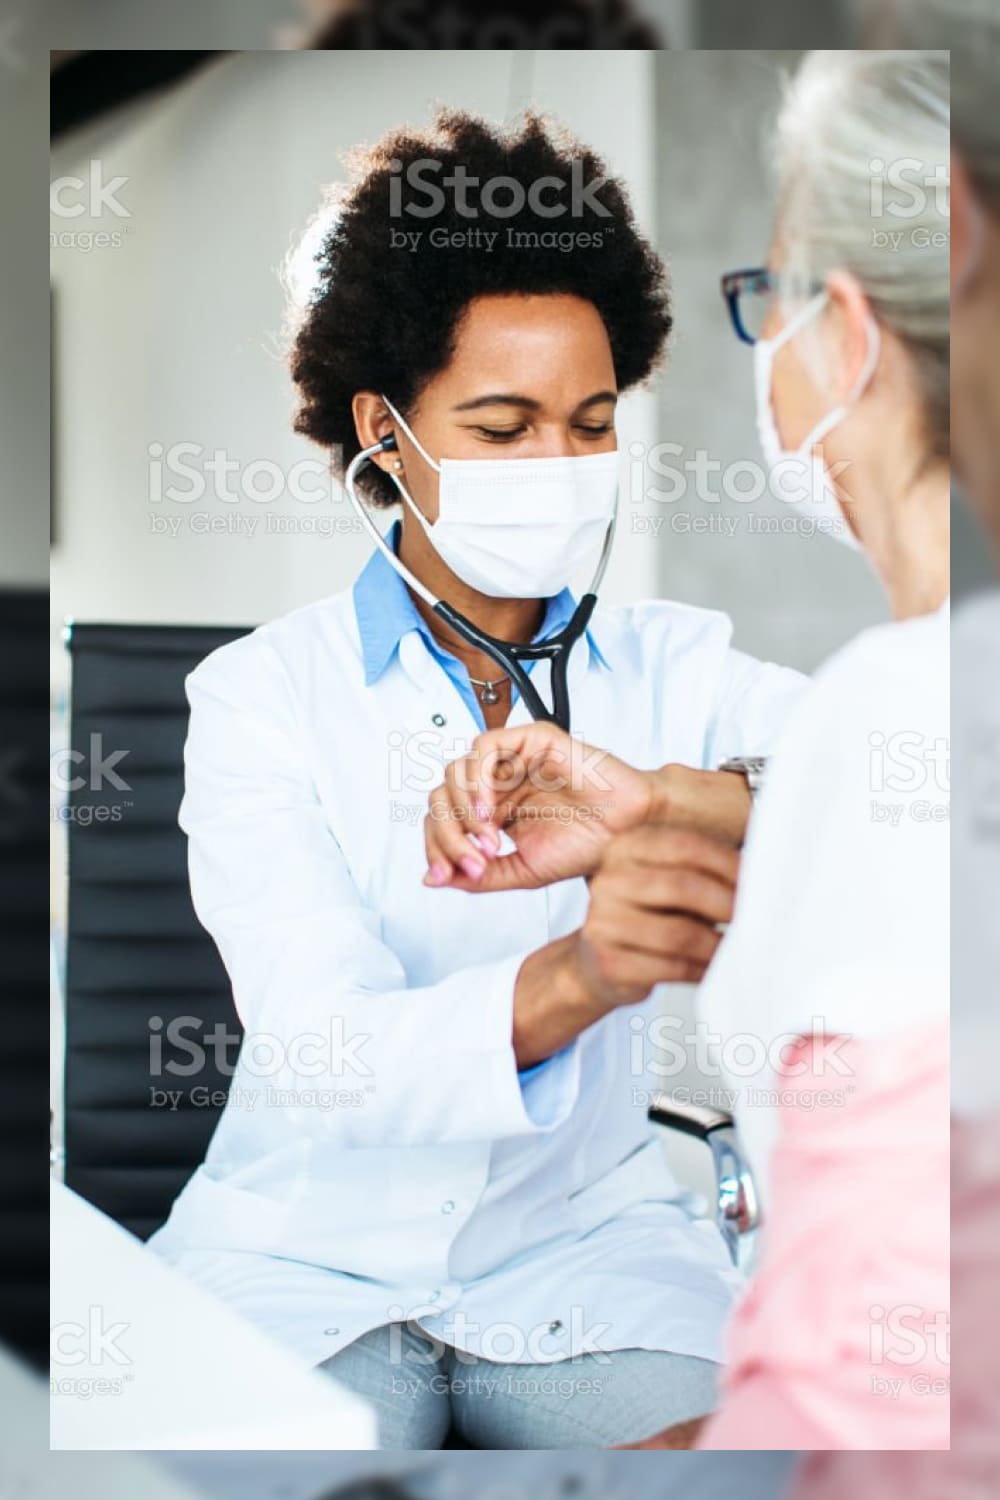 Doctors appointment at the modern clinic stock photo.